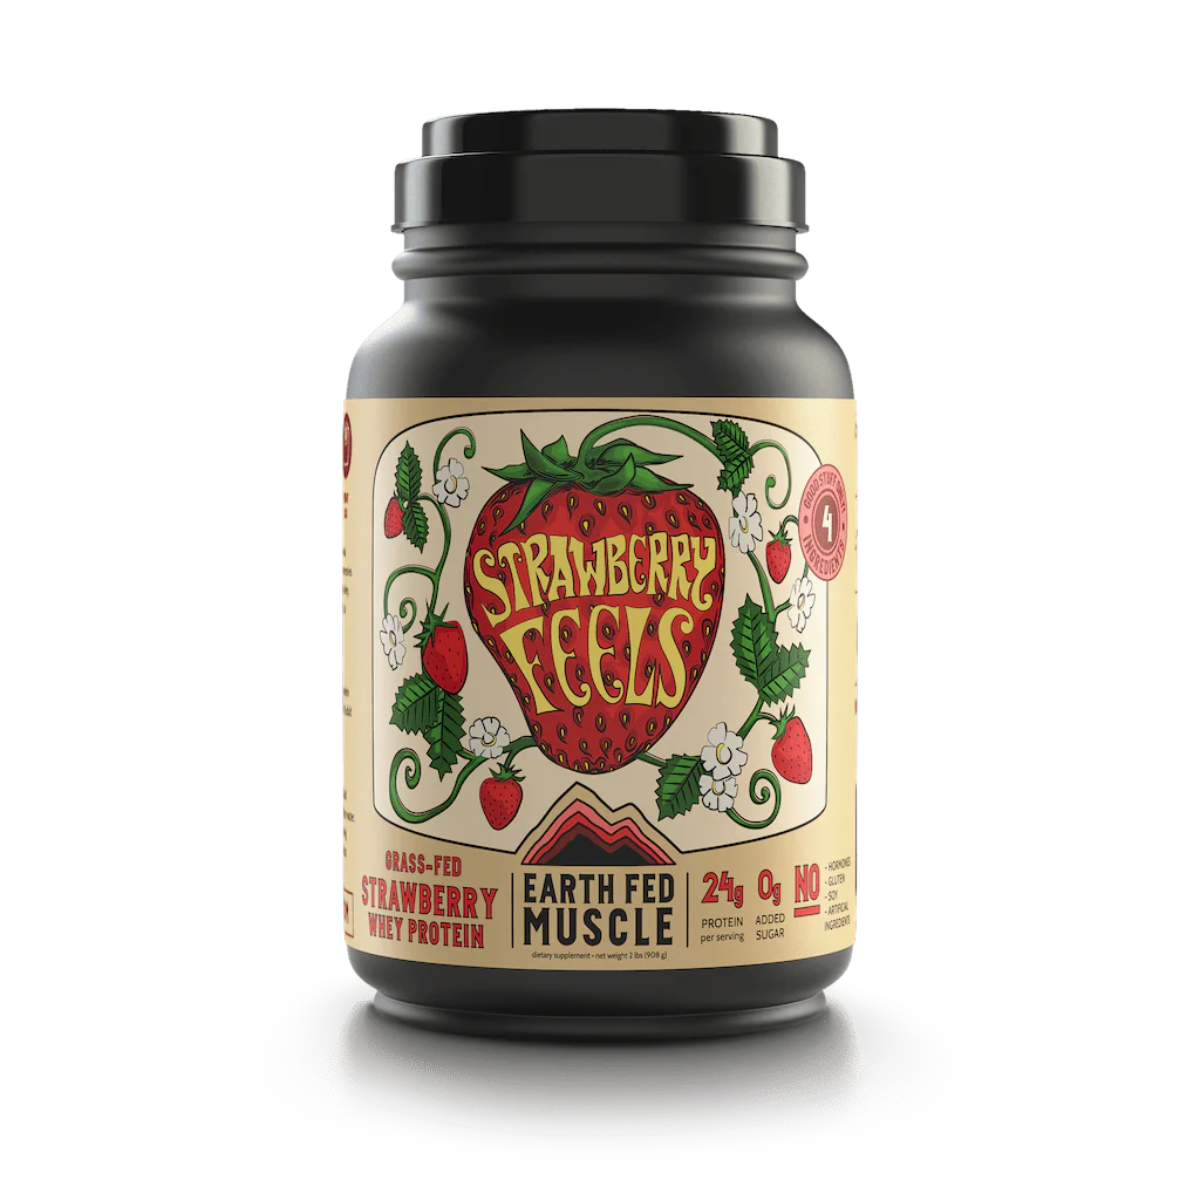 Earth Fed Muscle Grass Fed Strawberry Whey Protein